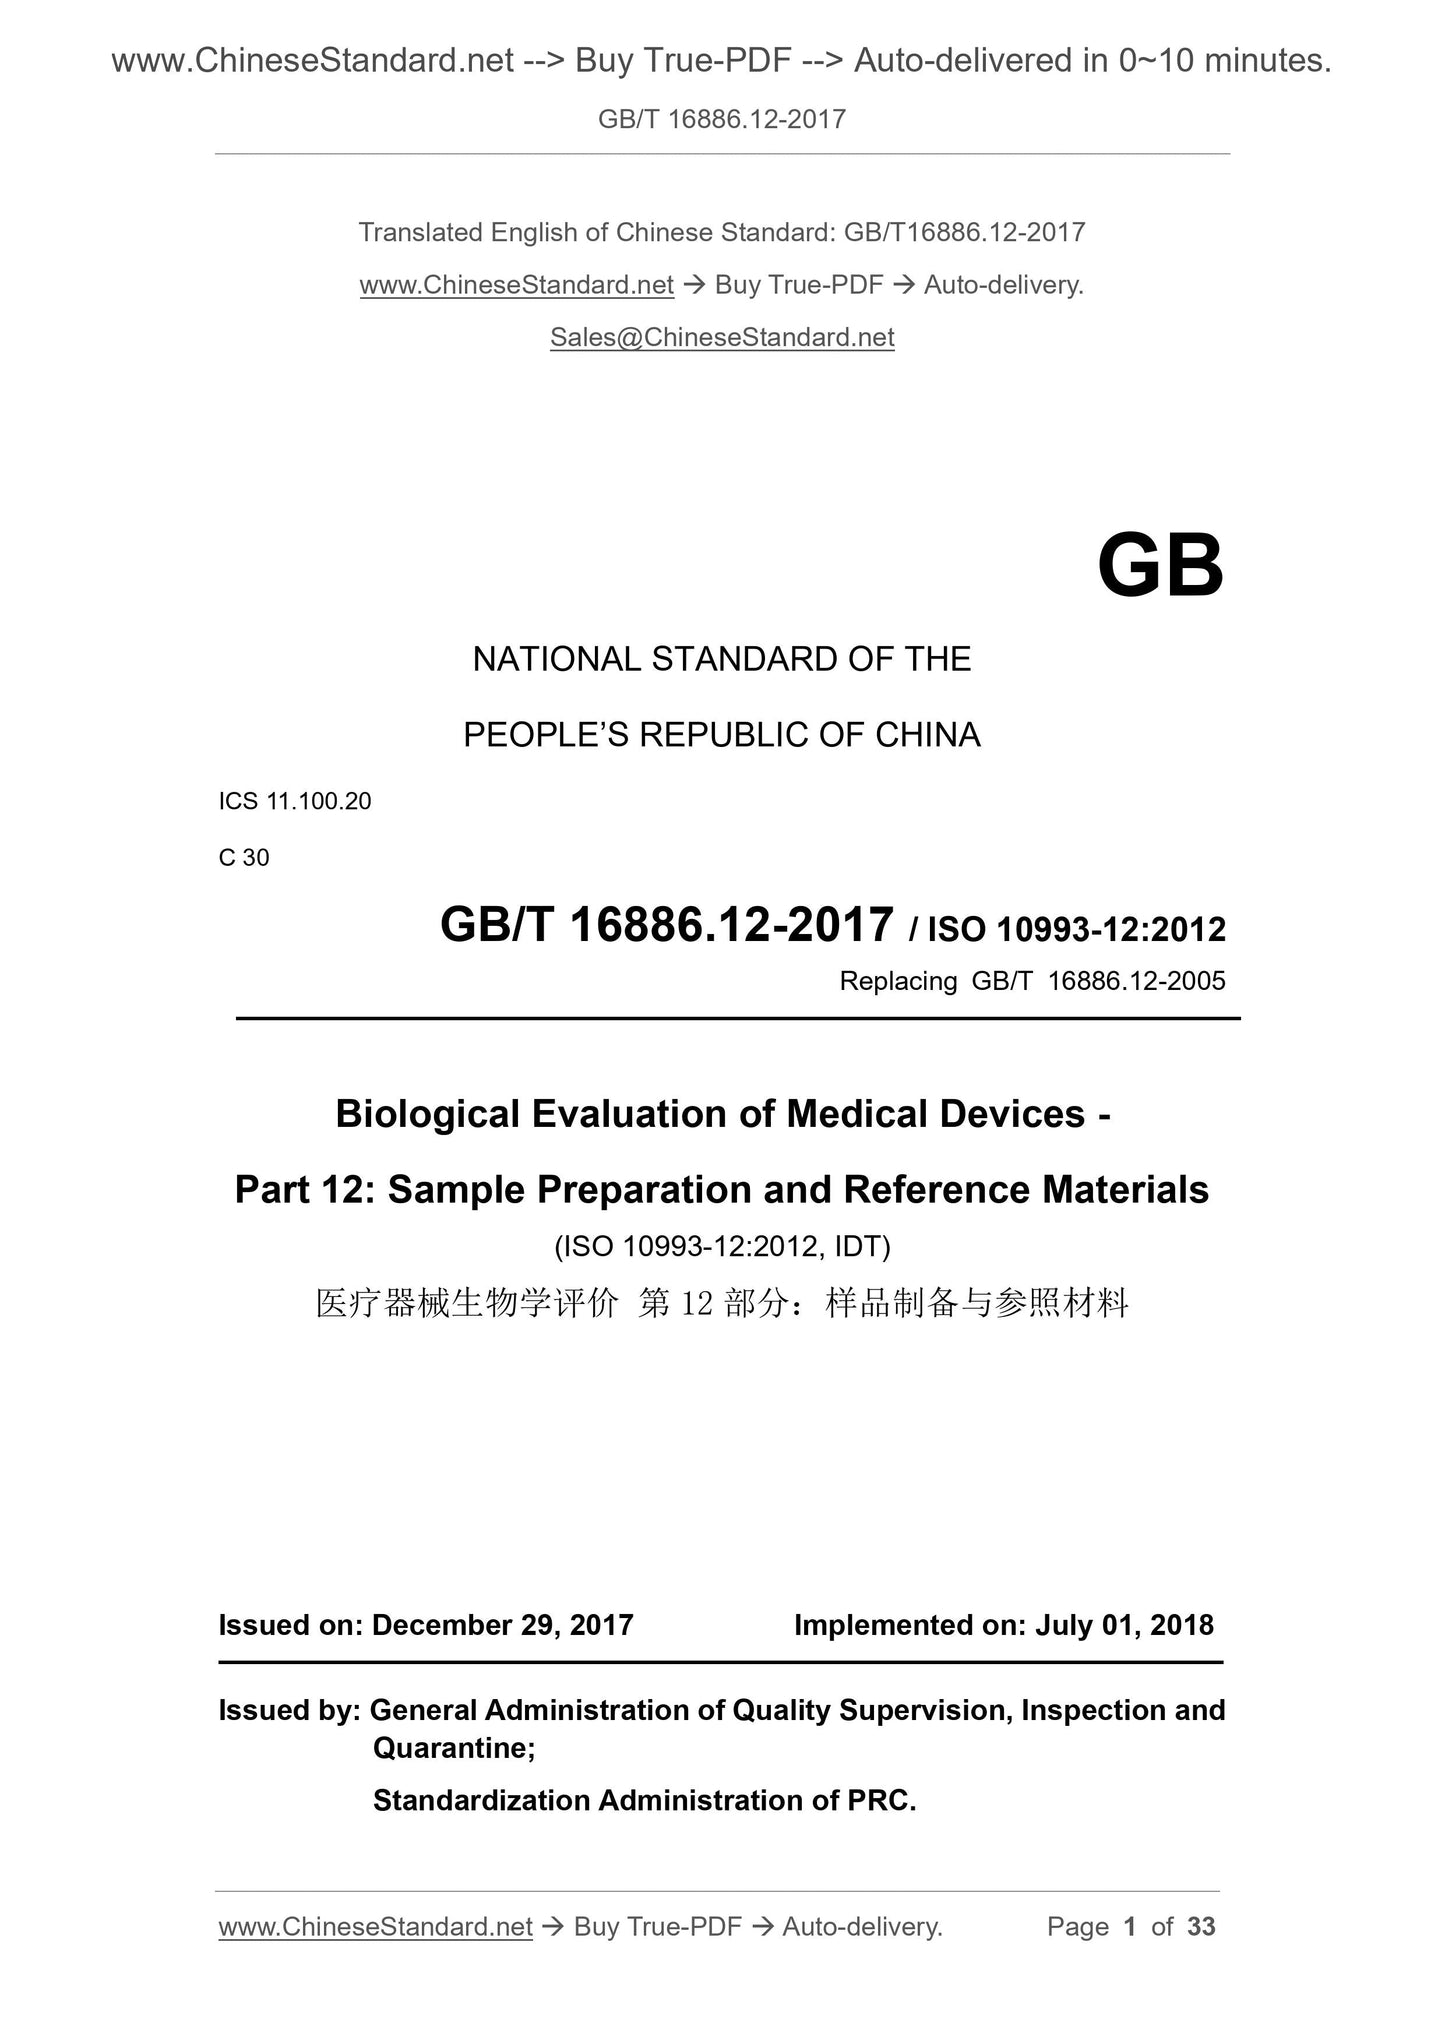 GB/T 16886.12-2017 Page 1